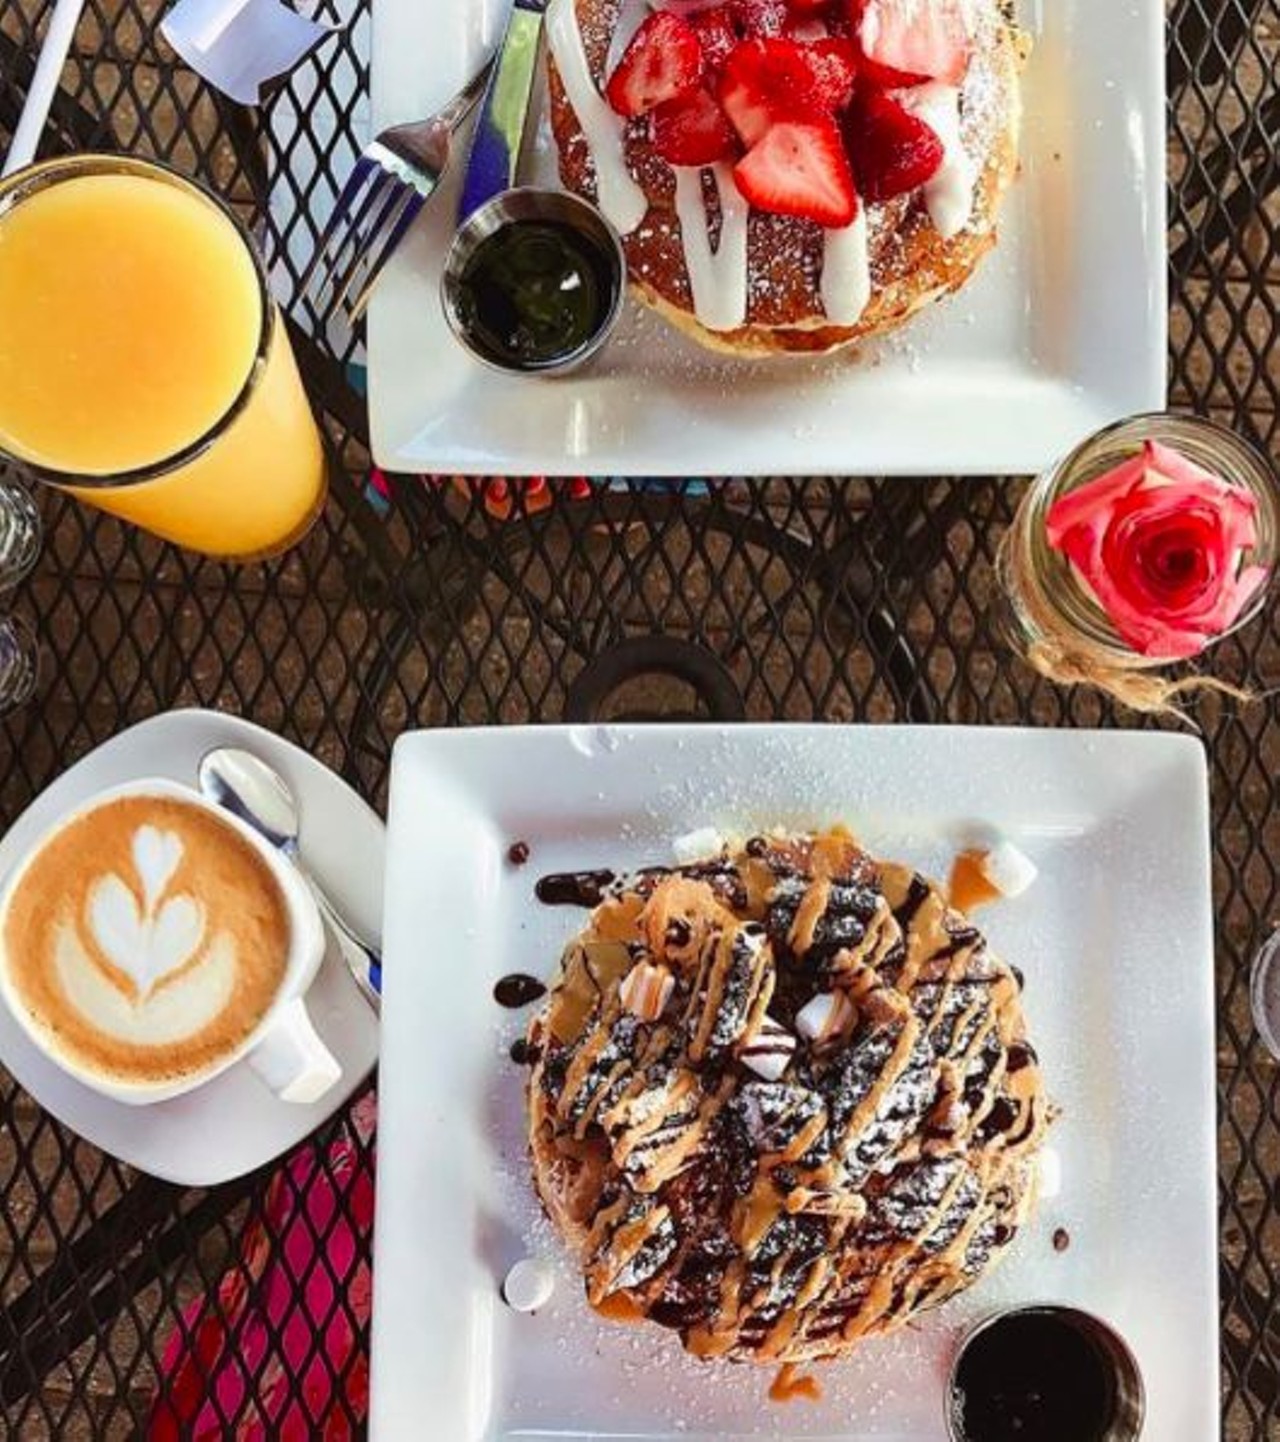 Rochester Brunch House
301 Walnut Blvd., Rochester
Though they&#146;re known for their sweeter offerings, the Brunch House also boasts dozens of unique savory options. Whether you&#146;re in the mood for s&#146;mores pancakes or avocado toast, you&#146;re going to want to come back for more.
Photo via IG user @rochester_brunch_house